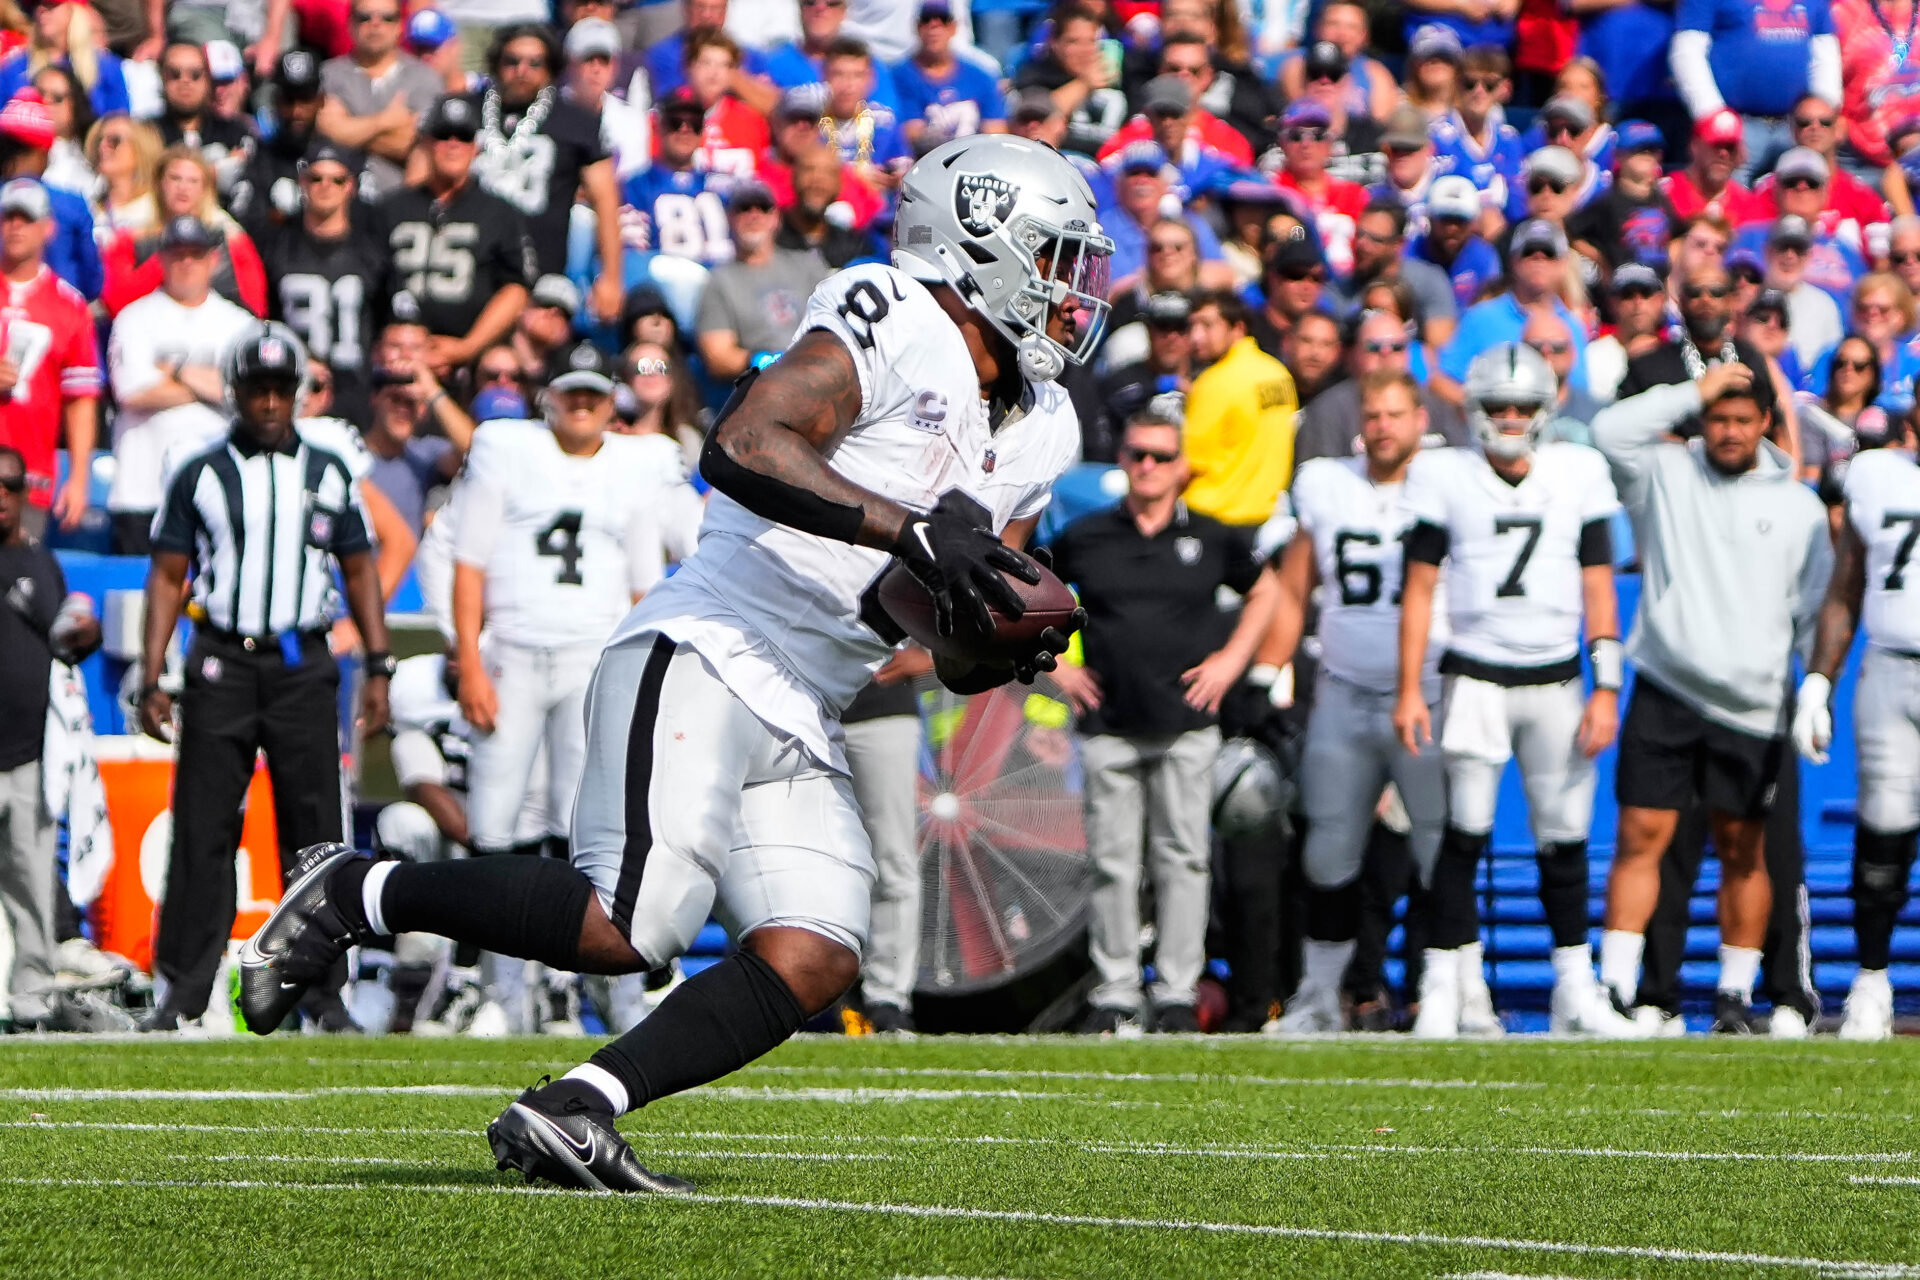 Las Vegas Raiders running back Josh Jacobs (8) makes a catch against the Buffalo Bills during the second half at Highmark Stadium.